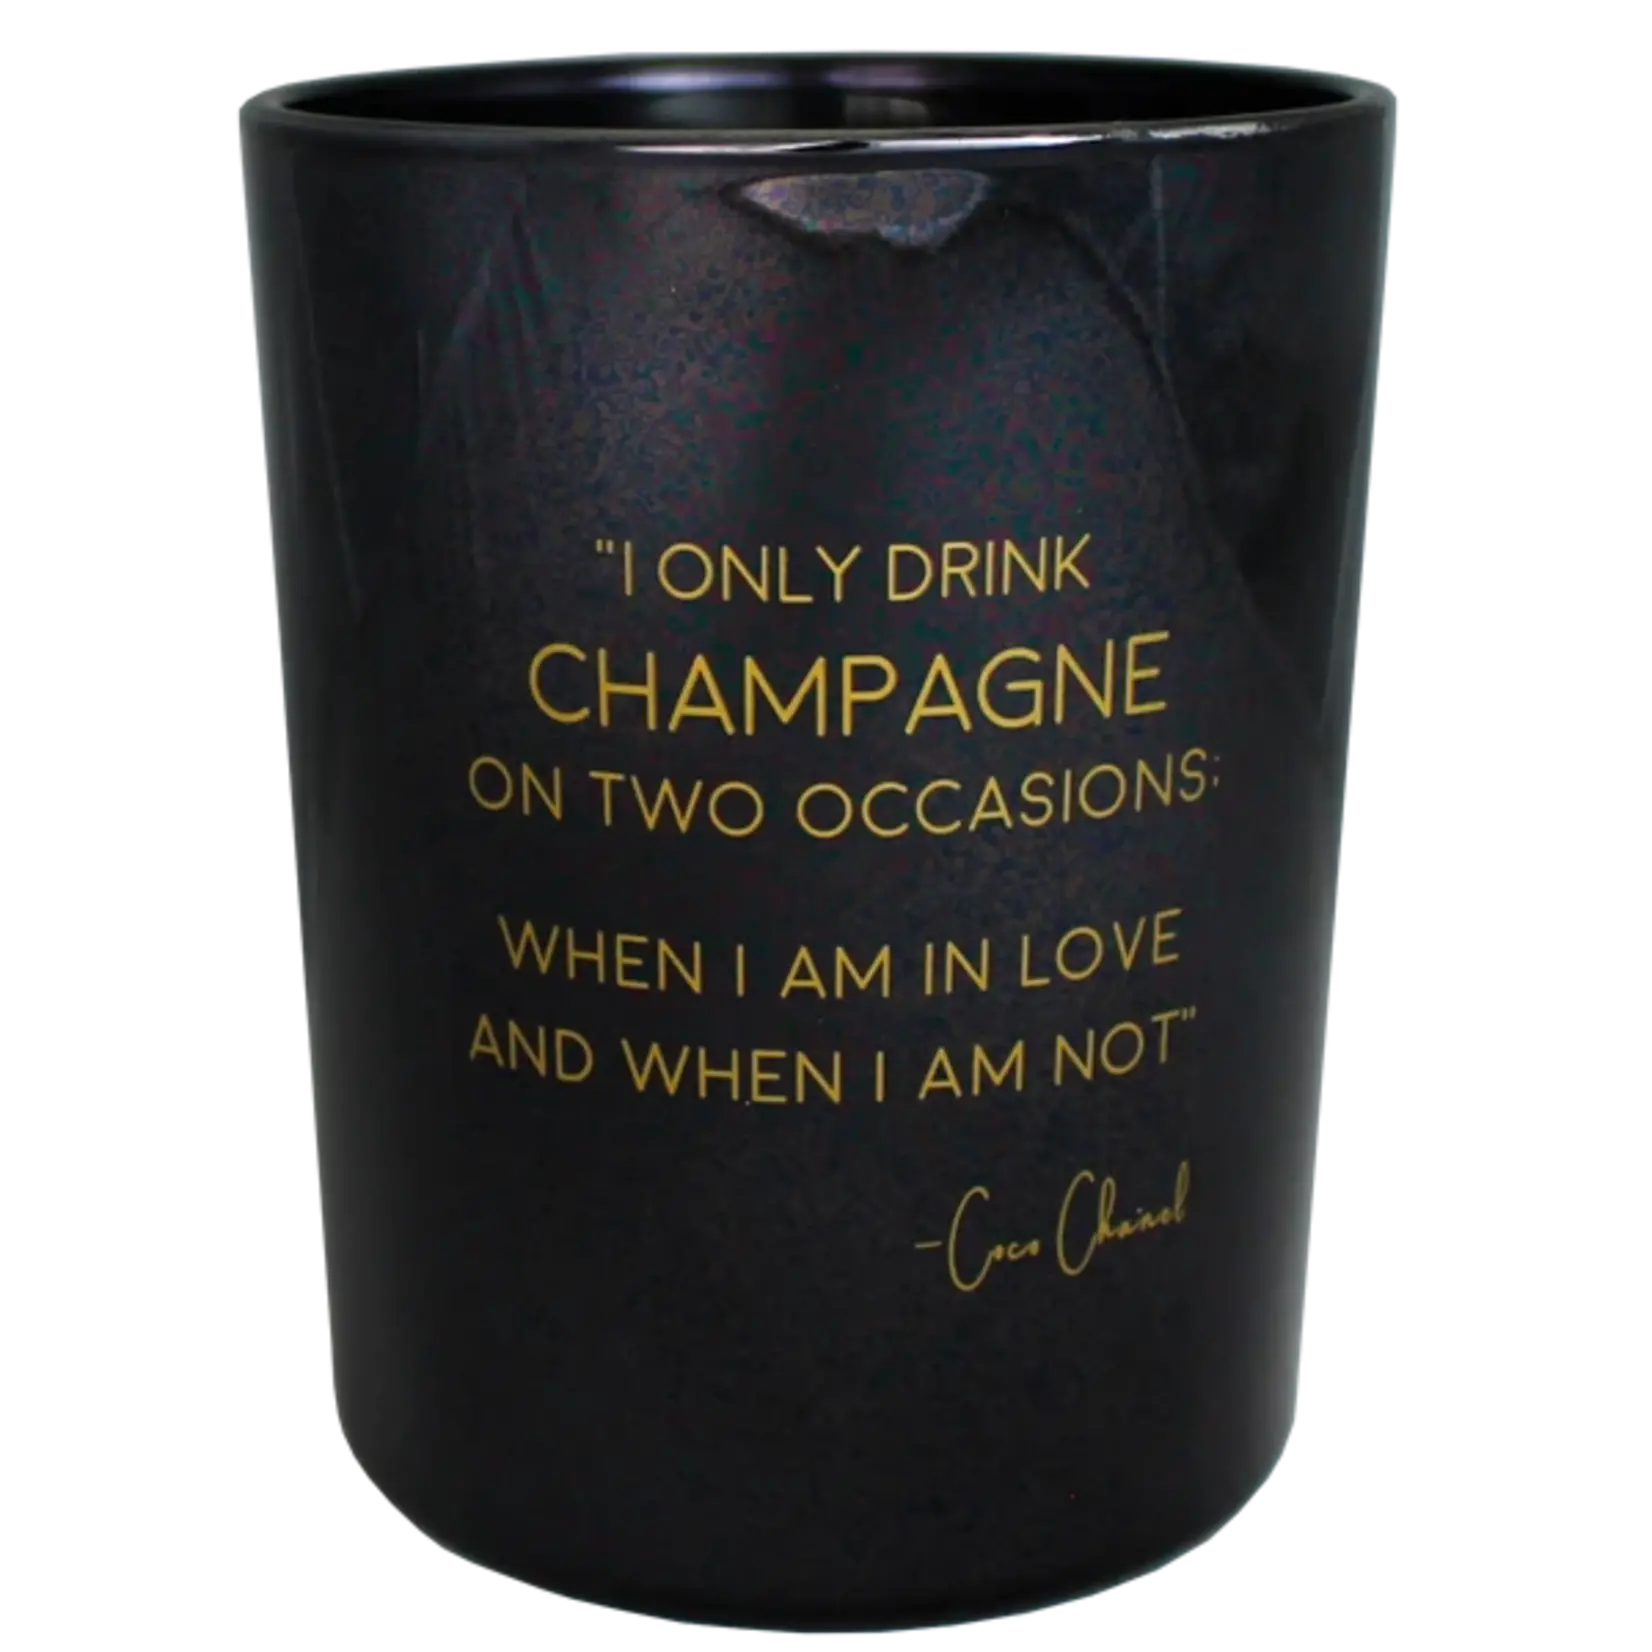 My Flame Sojakaars - I only drink champagne on two occasiona.... - Coco Chanel